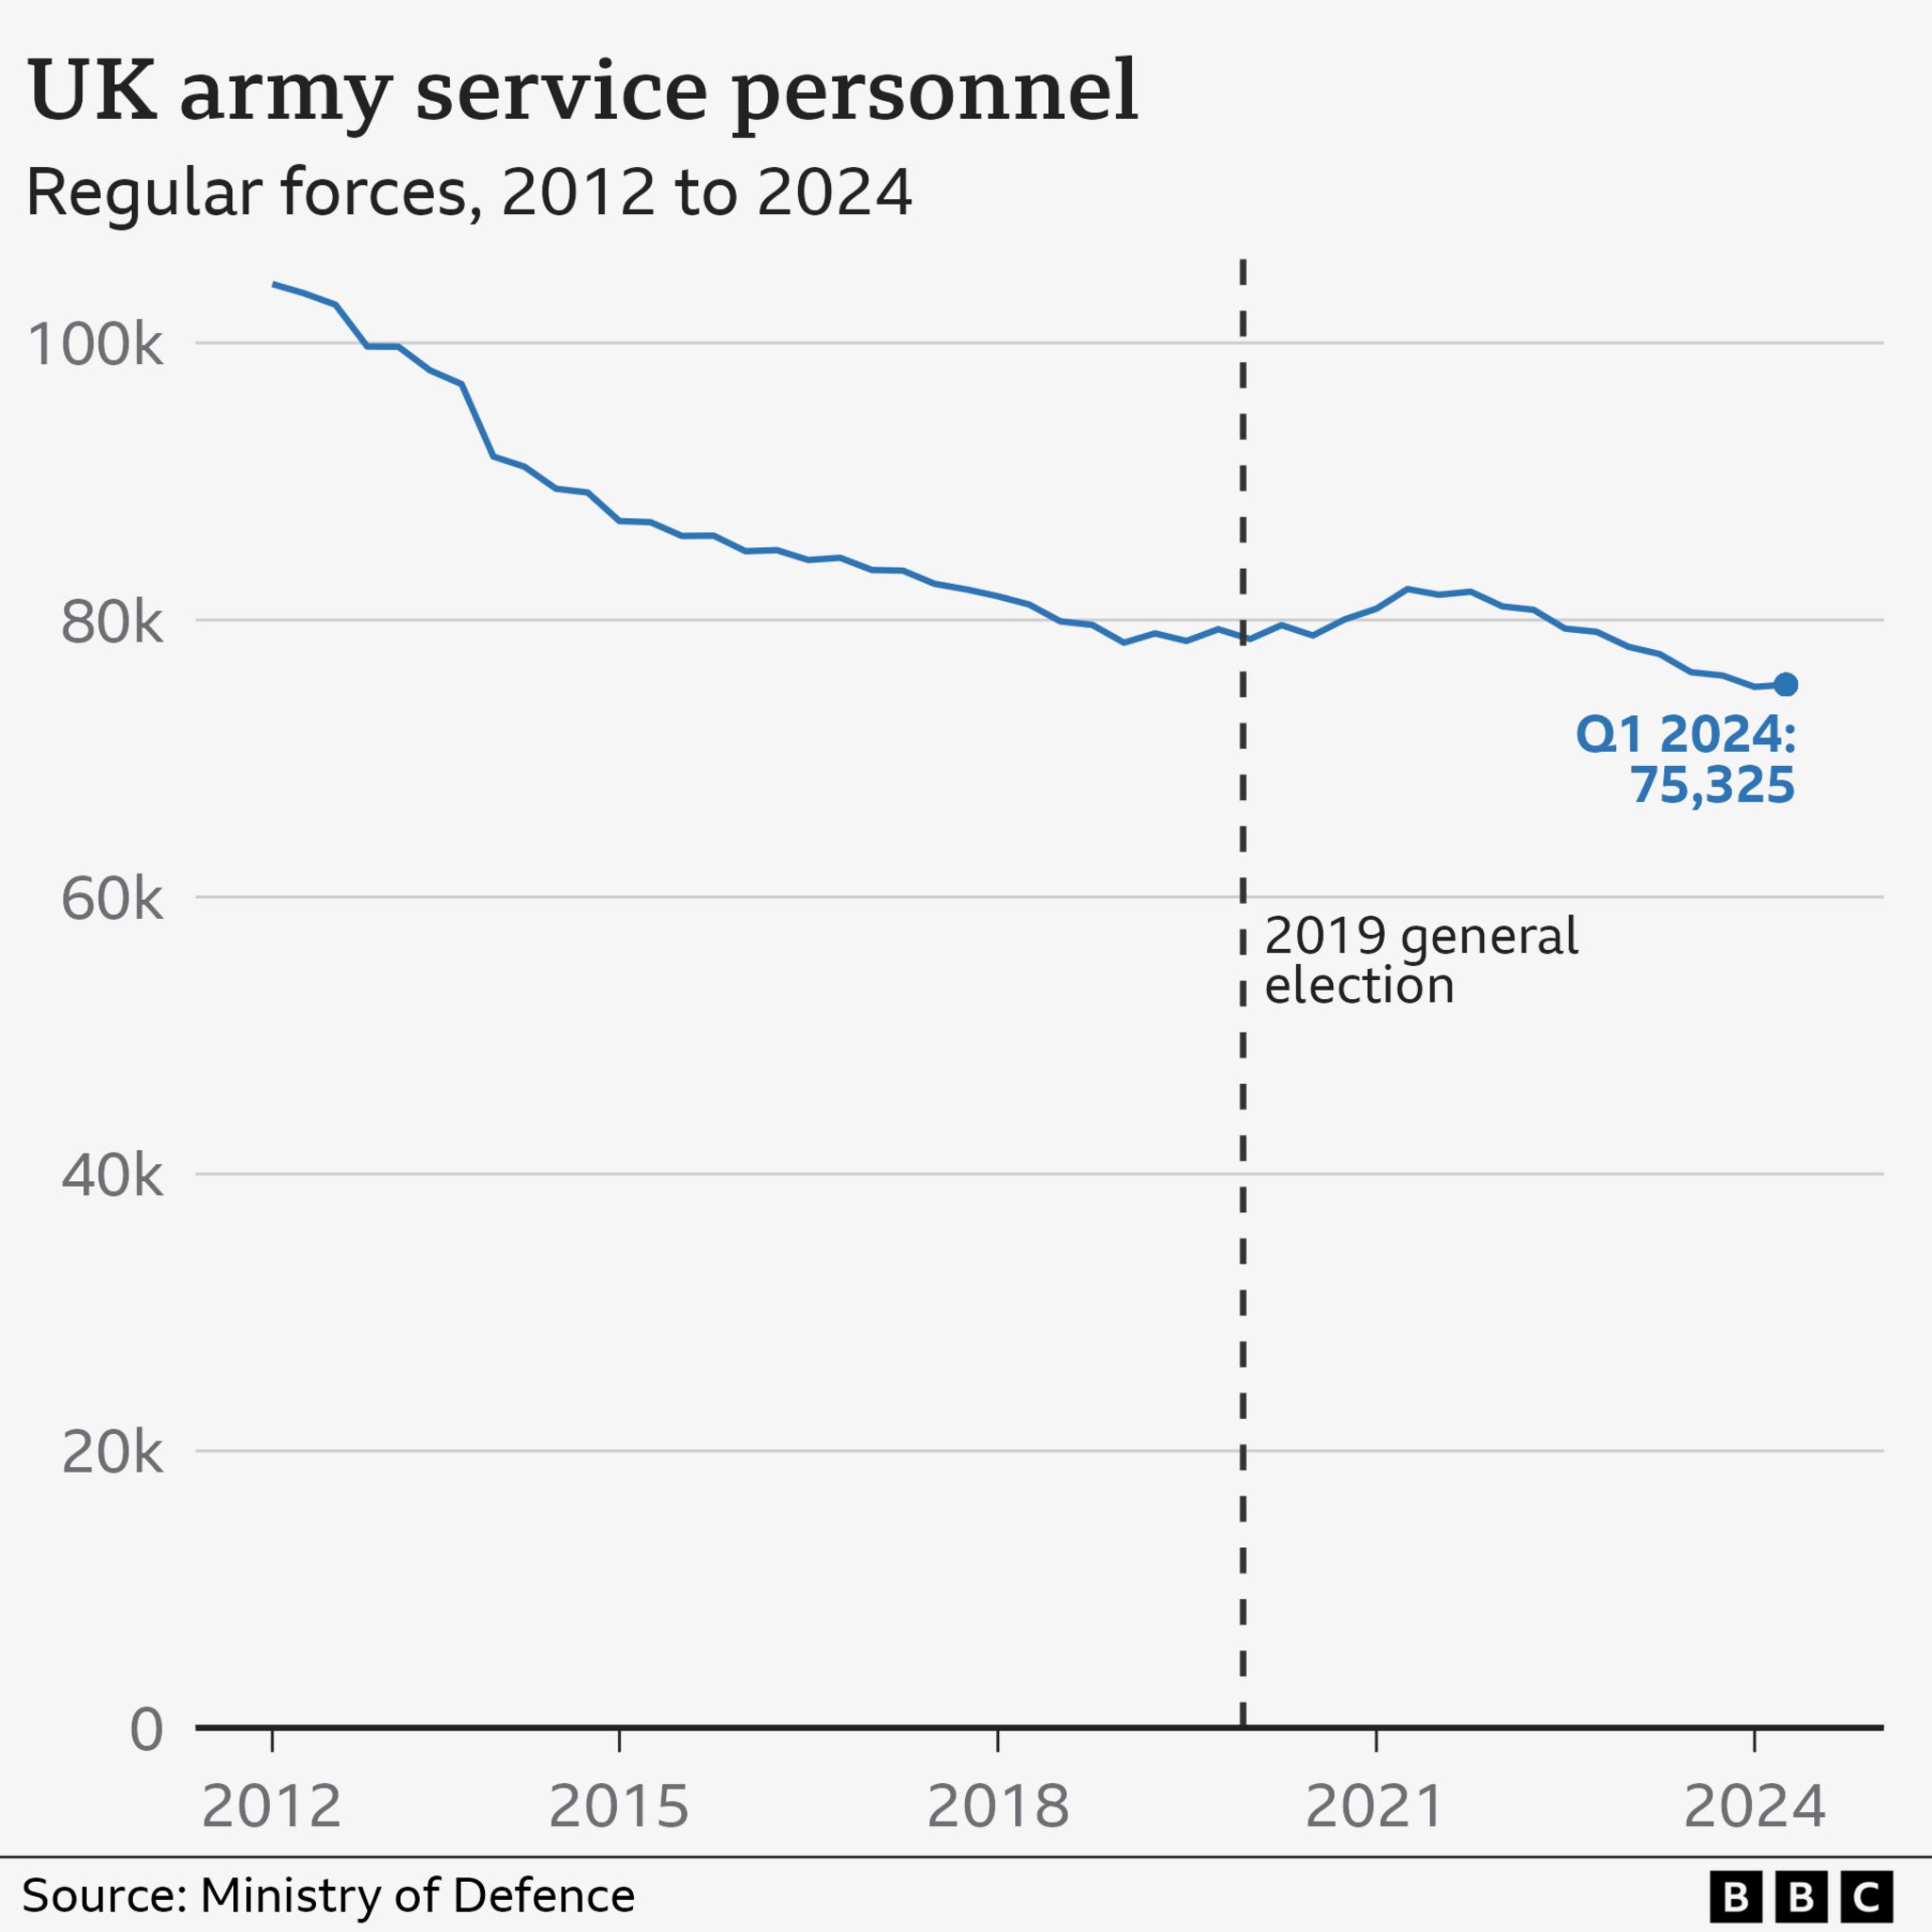 Graph showing reduction in UK Army service personnel, from above 100k in 2012 to 75,325 in 2024